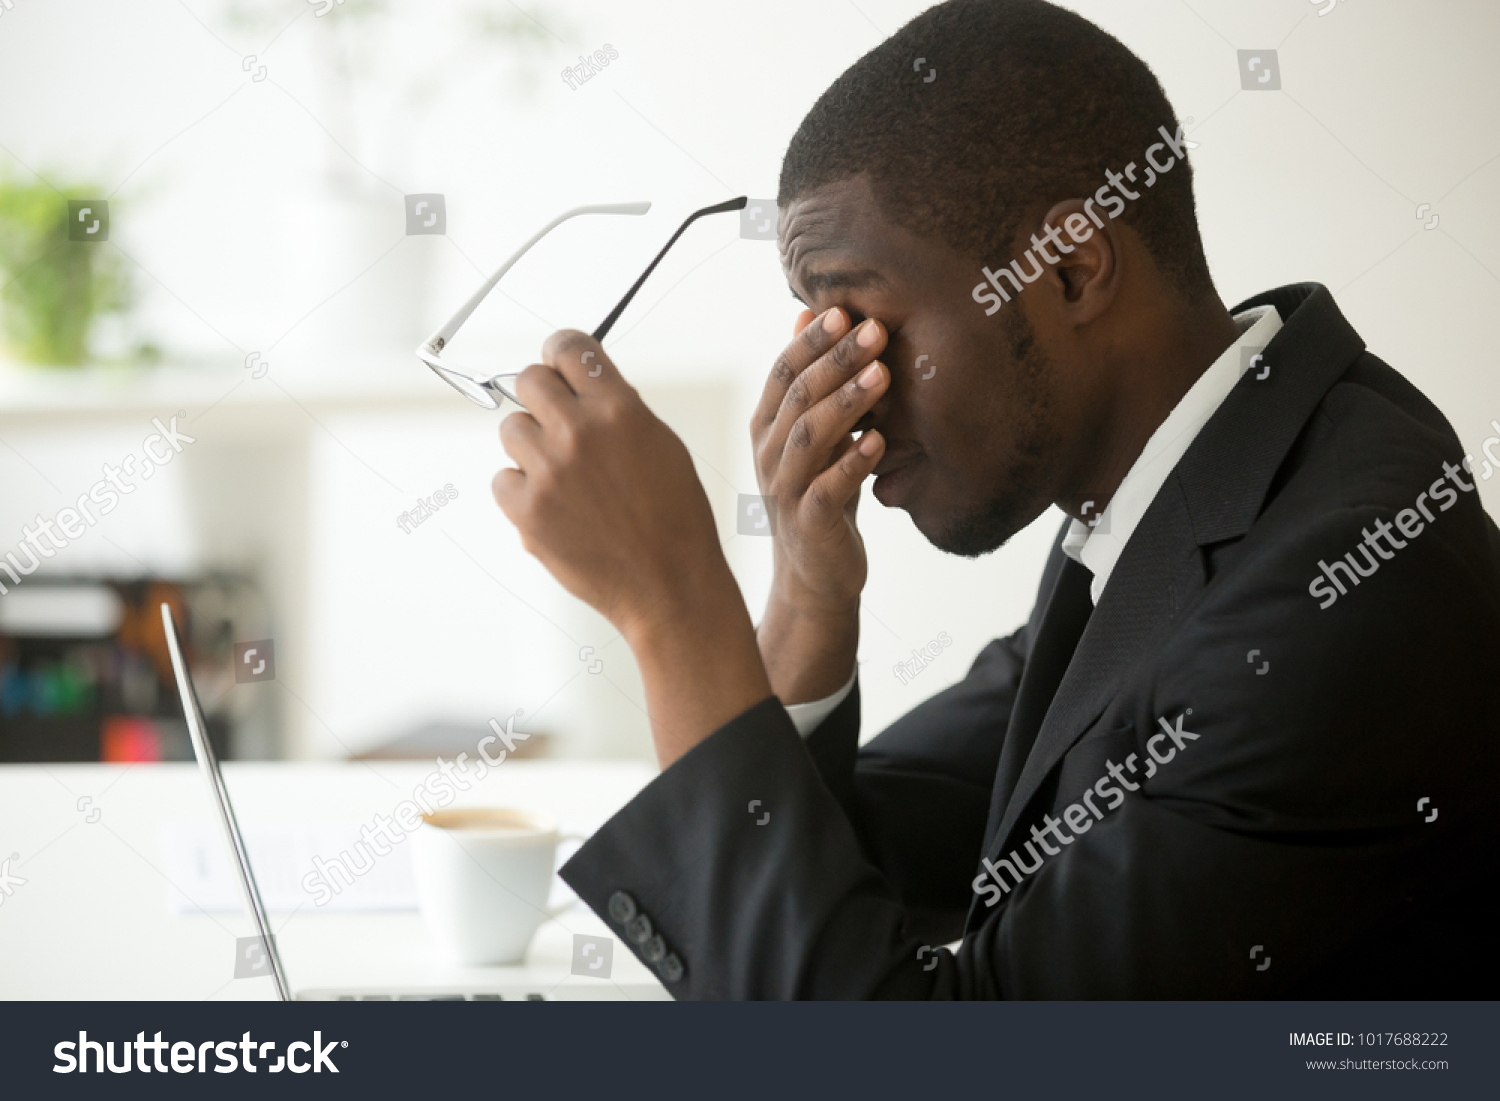 Tired of computer african businessman taking off glasses feels eye strain fatigue after long office work on laptop, exhausted overworked stressed depressed black man having bad sight vision problem #1017688222